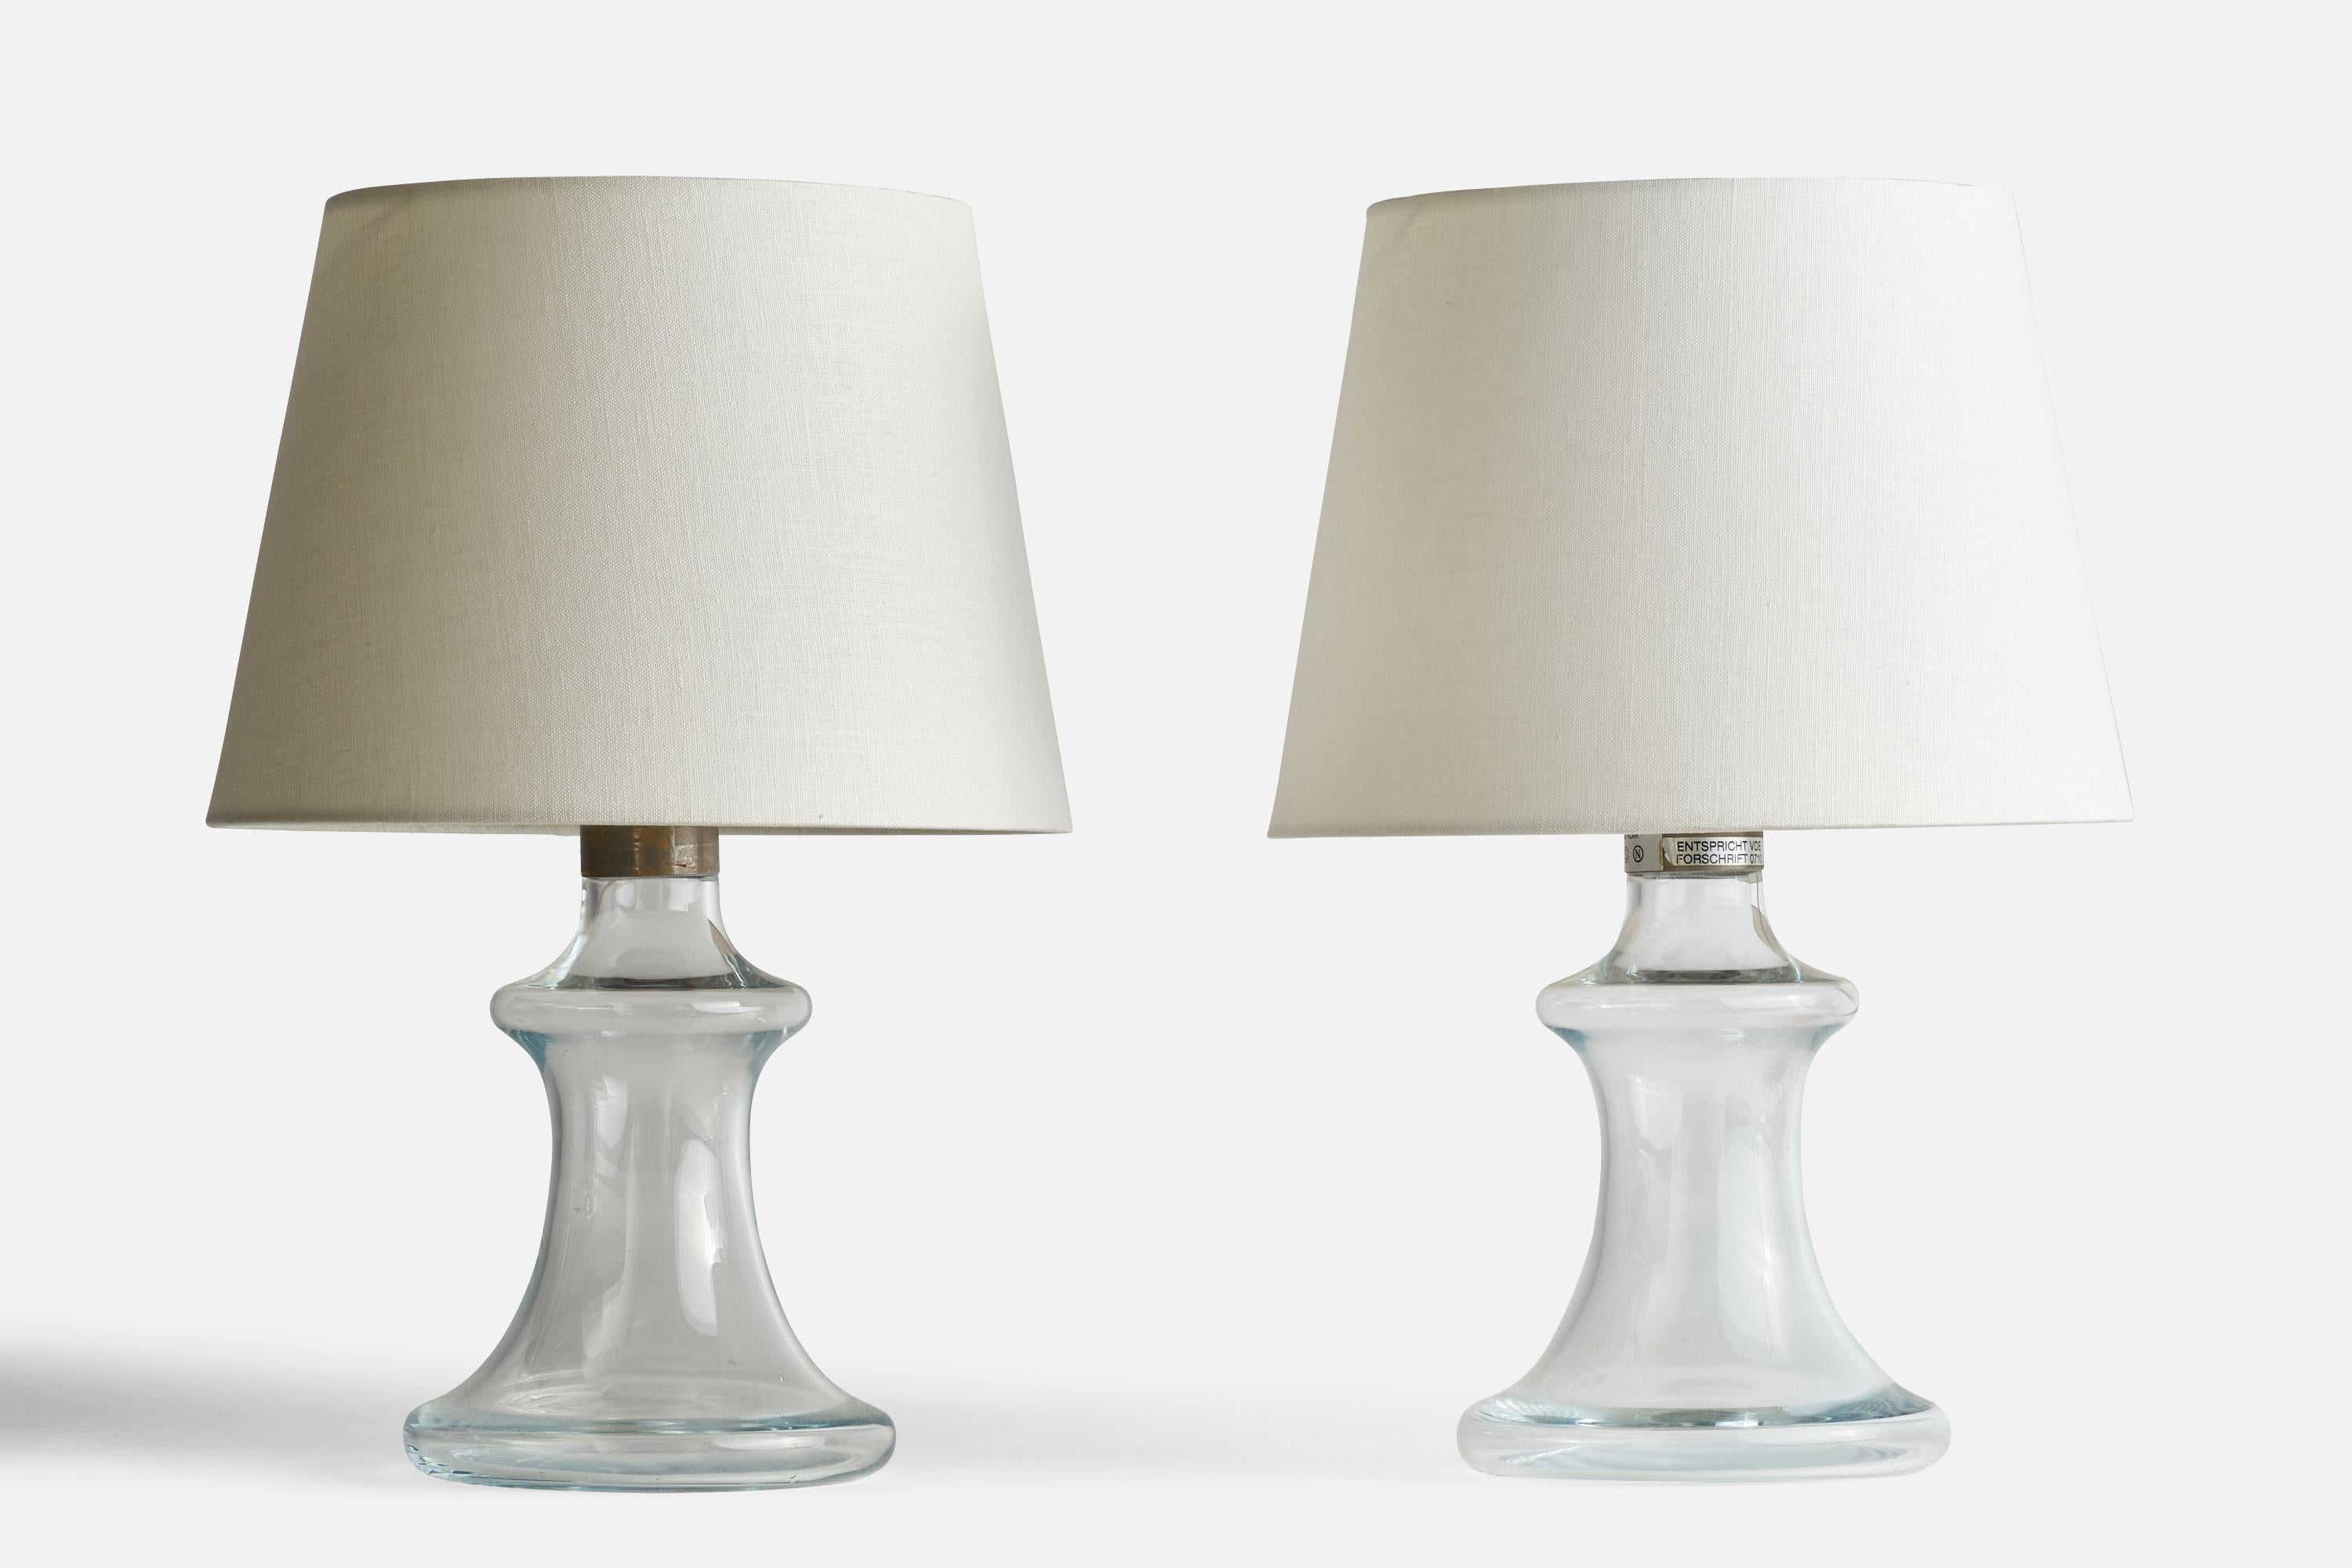 A pair of glass and metal table lamps designed by Jacob Bang and produced by Holmegaard, Denmark, c. 1970s.

Please note cord feeds from socket and runs visibly along base.

Dimensions of Lamp (inches): 12.5” H x 7” Diameter
Dimensions of Shade